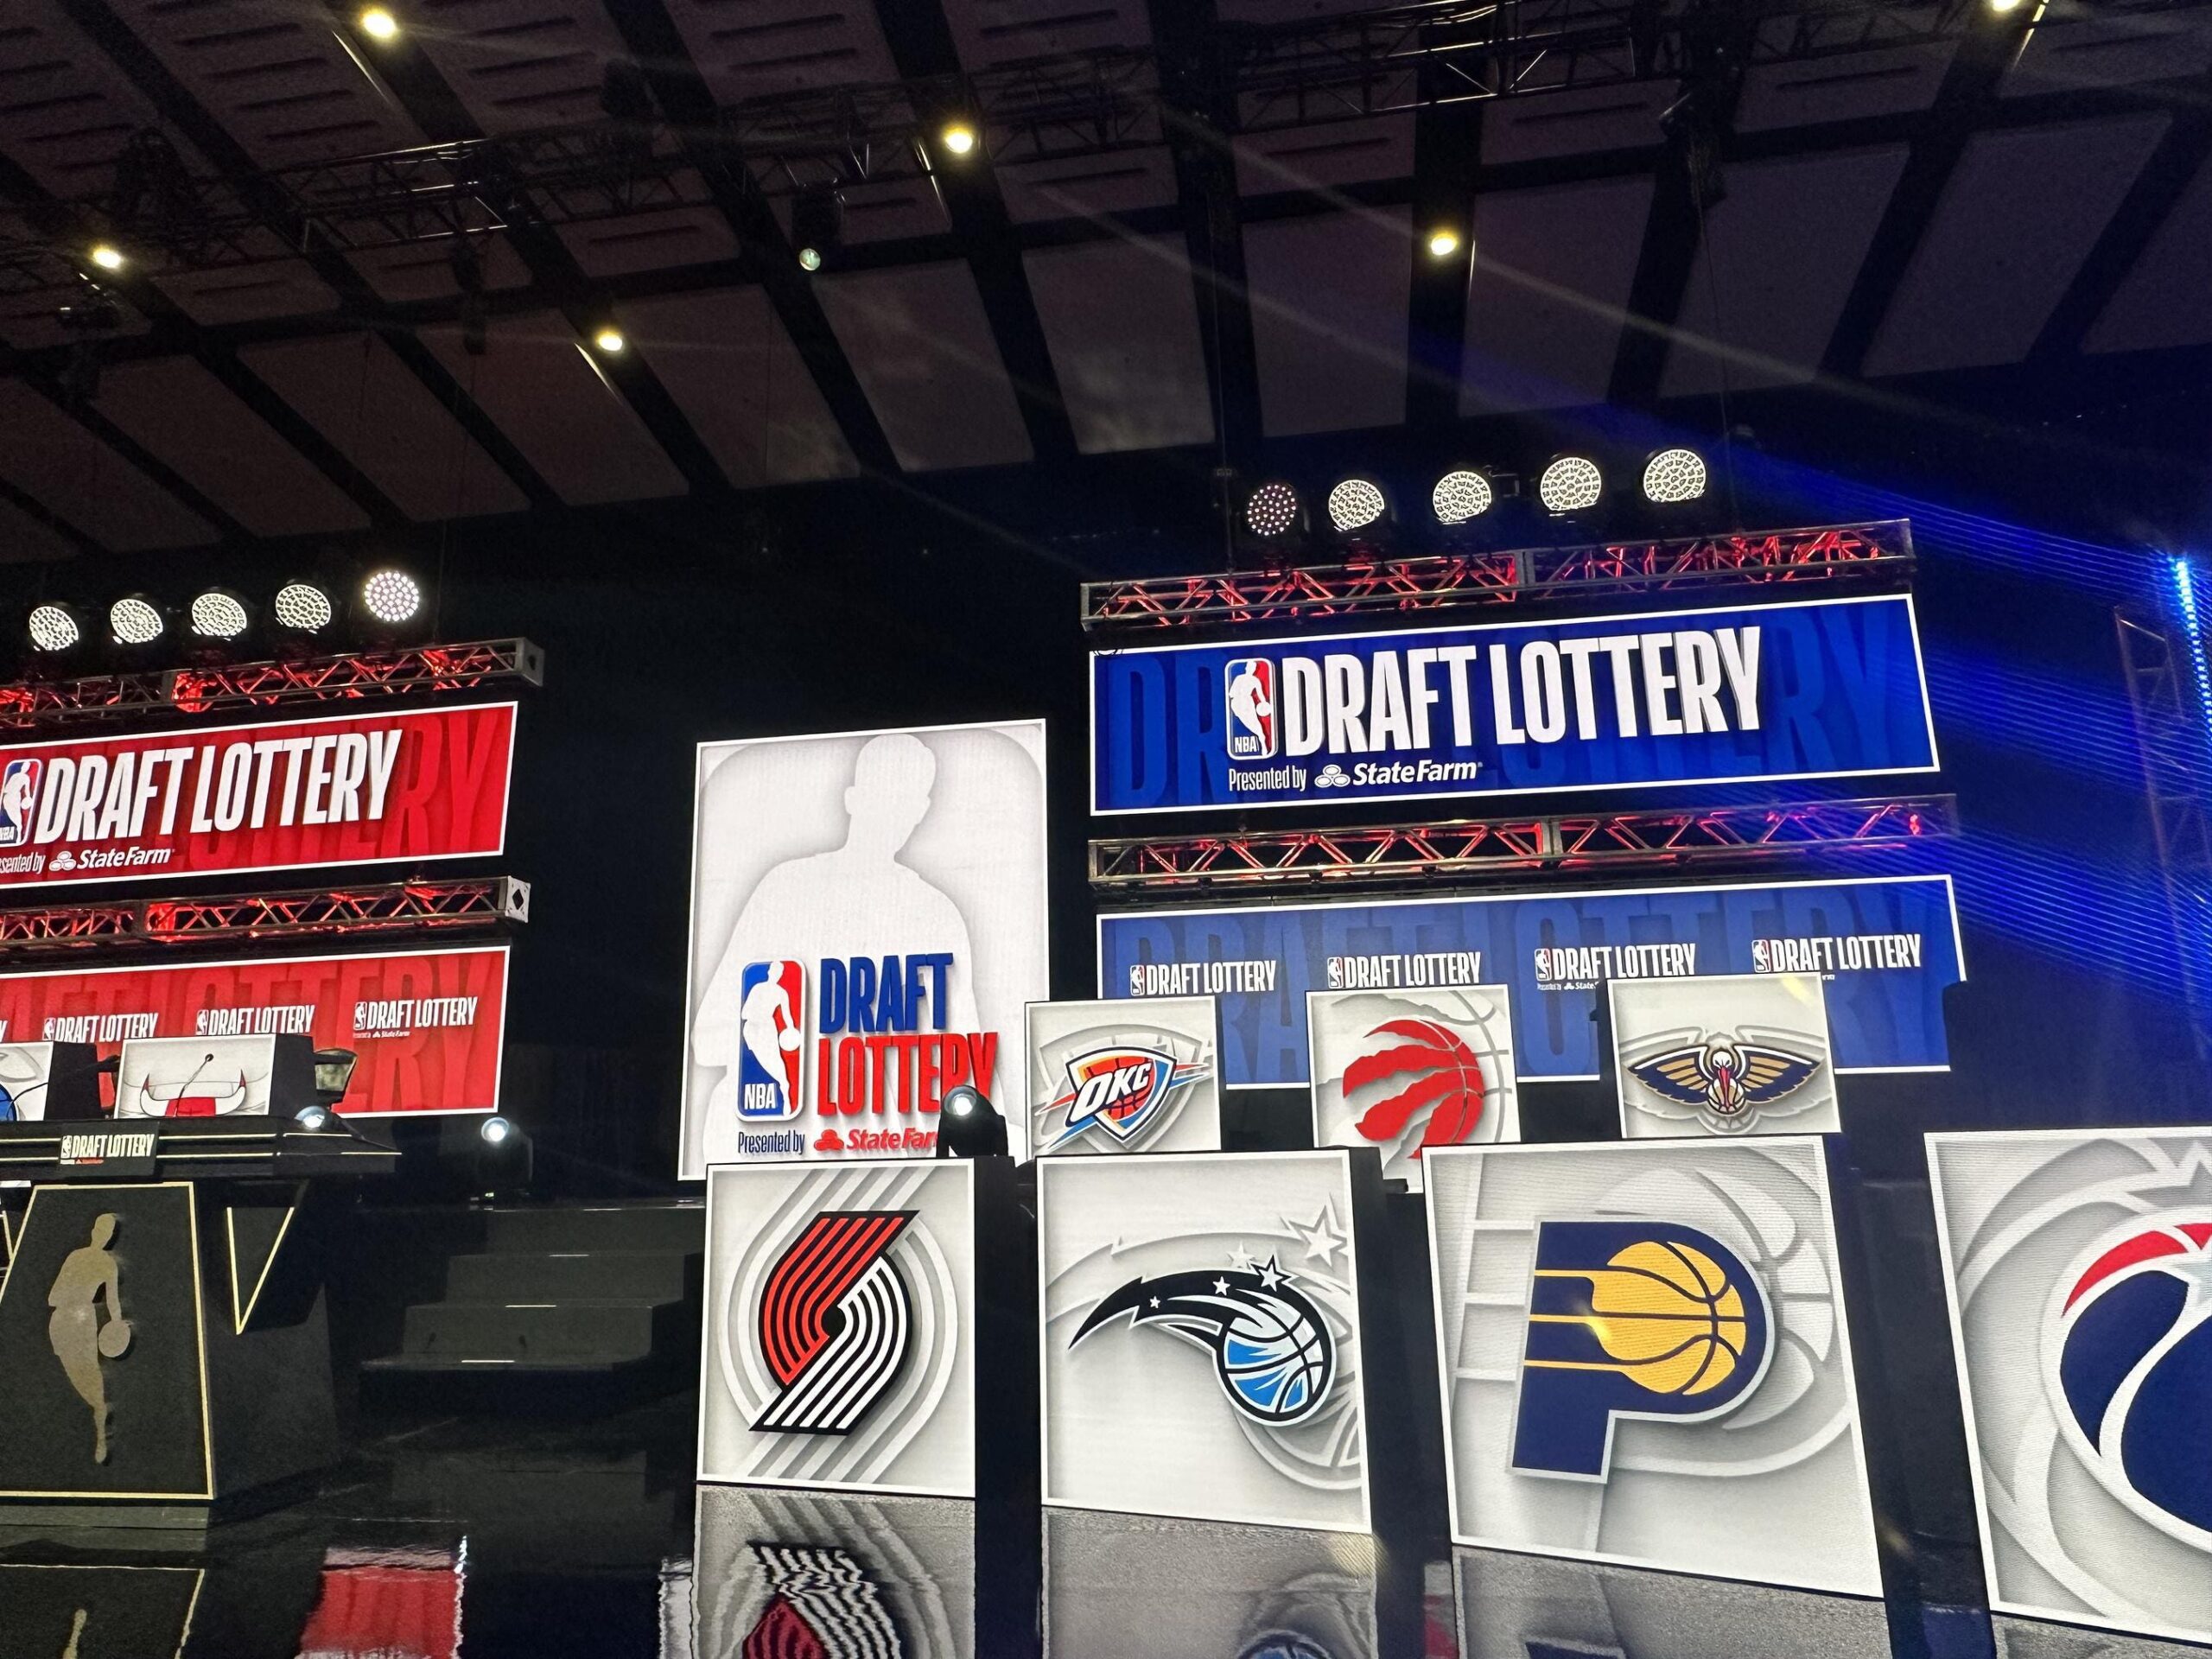 Next Steps For Thunder Following NBA Draft Lottery